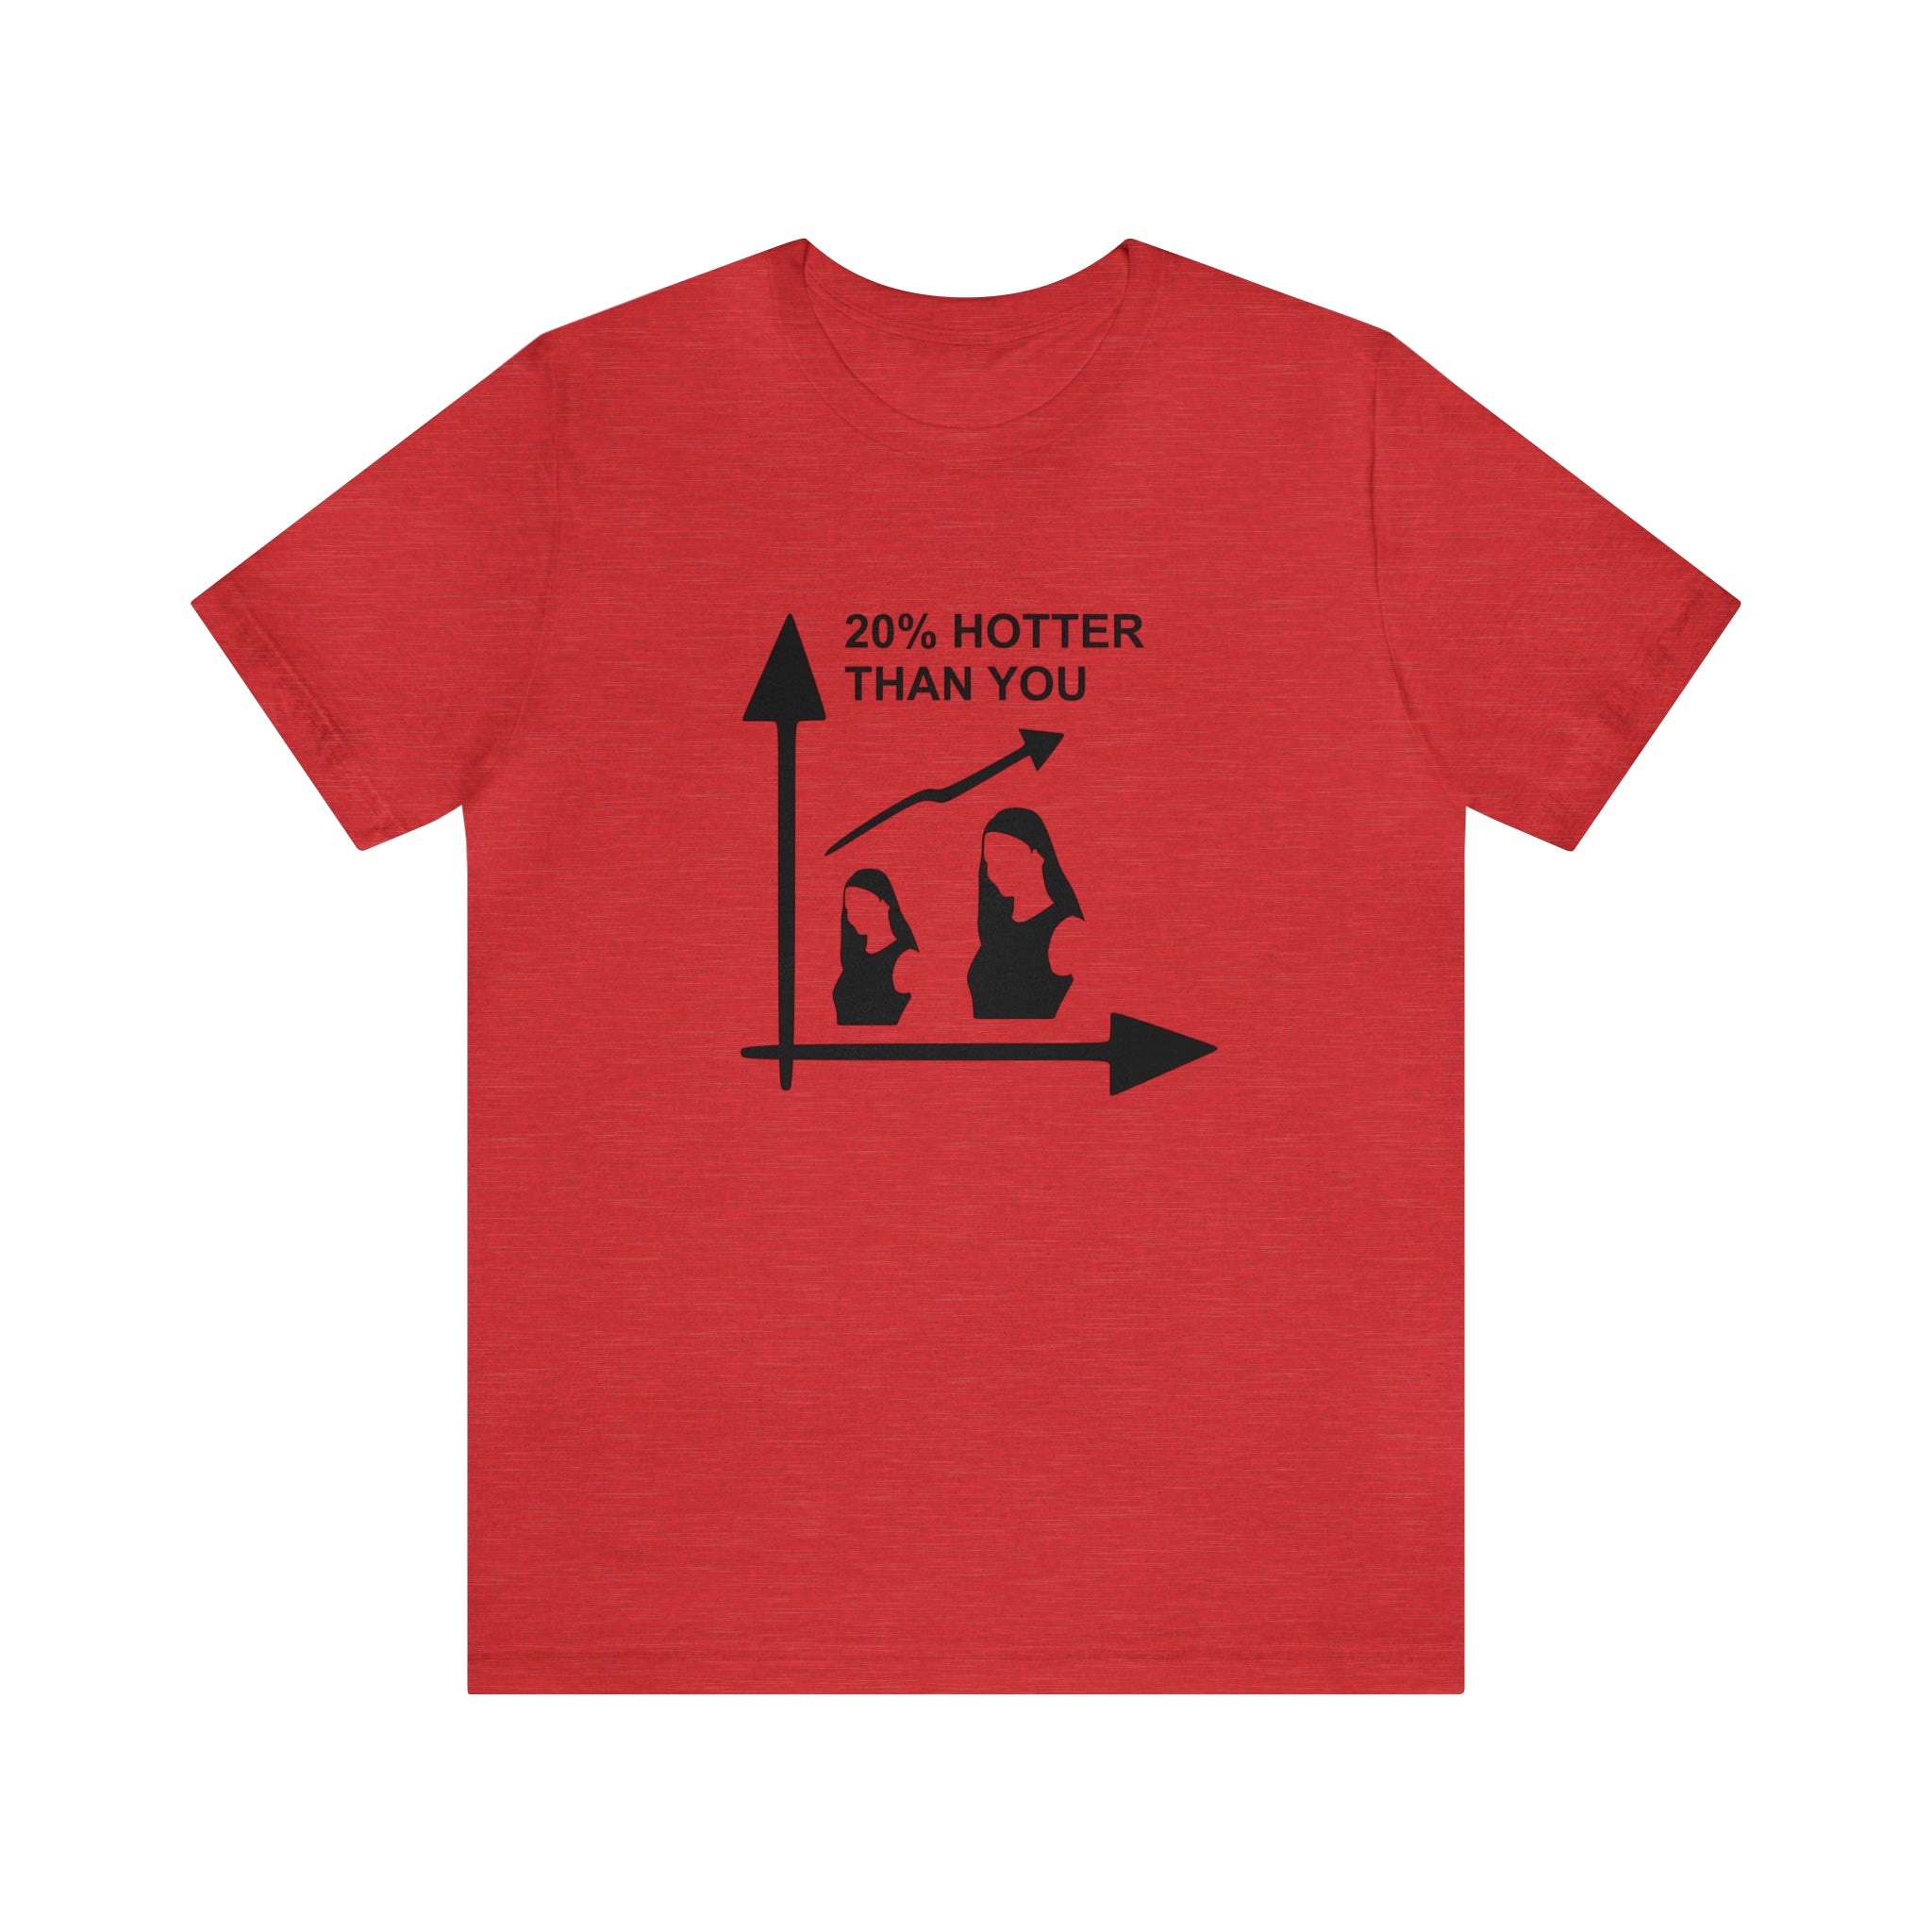 A red shirt with black text, featuring the Hotter than You T-Shirt design.